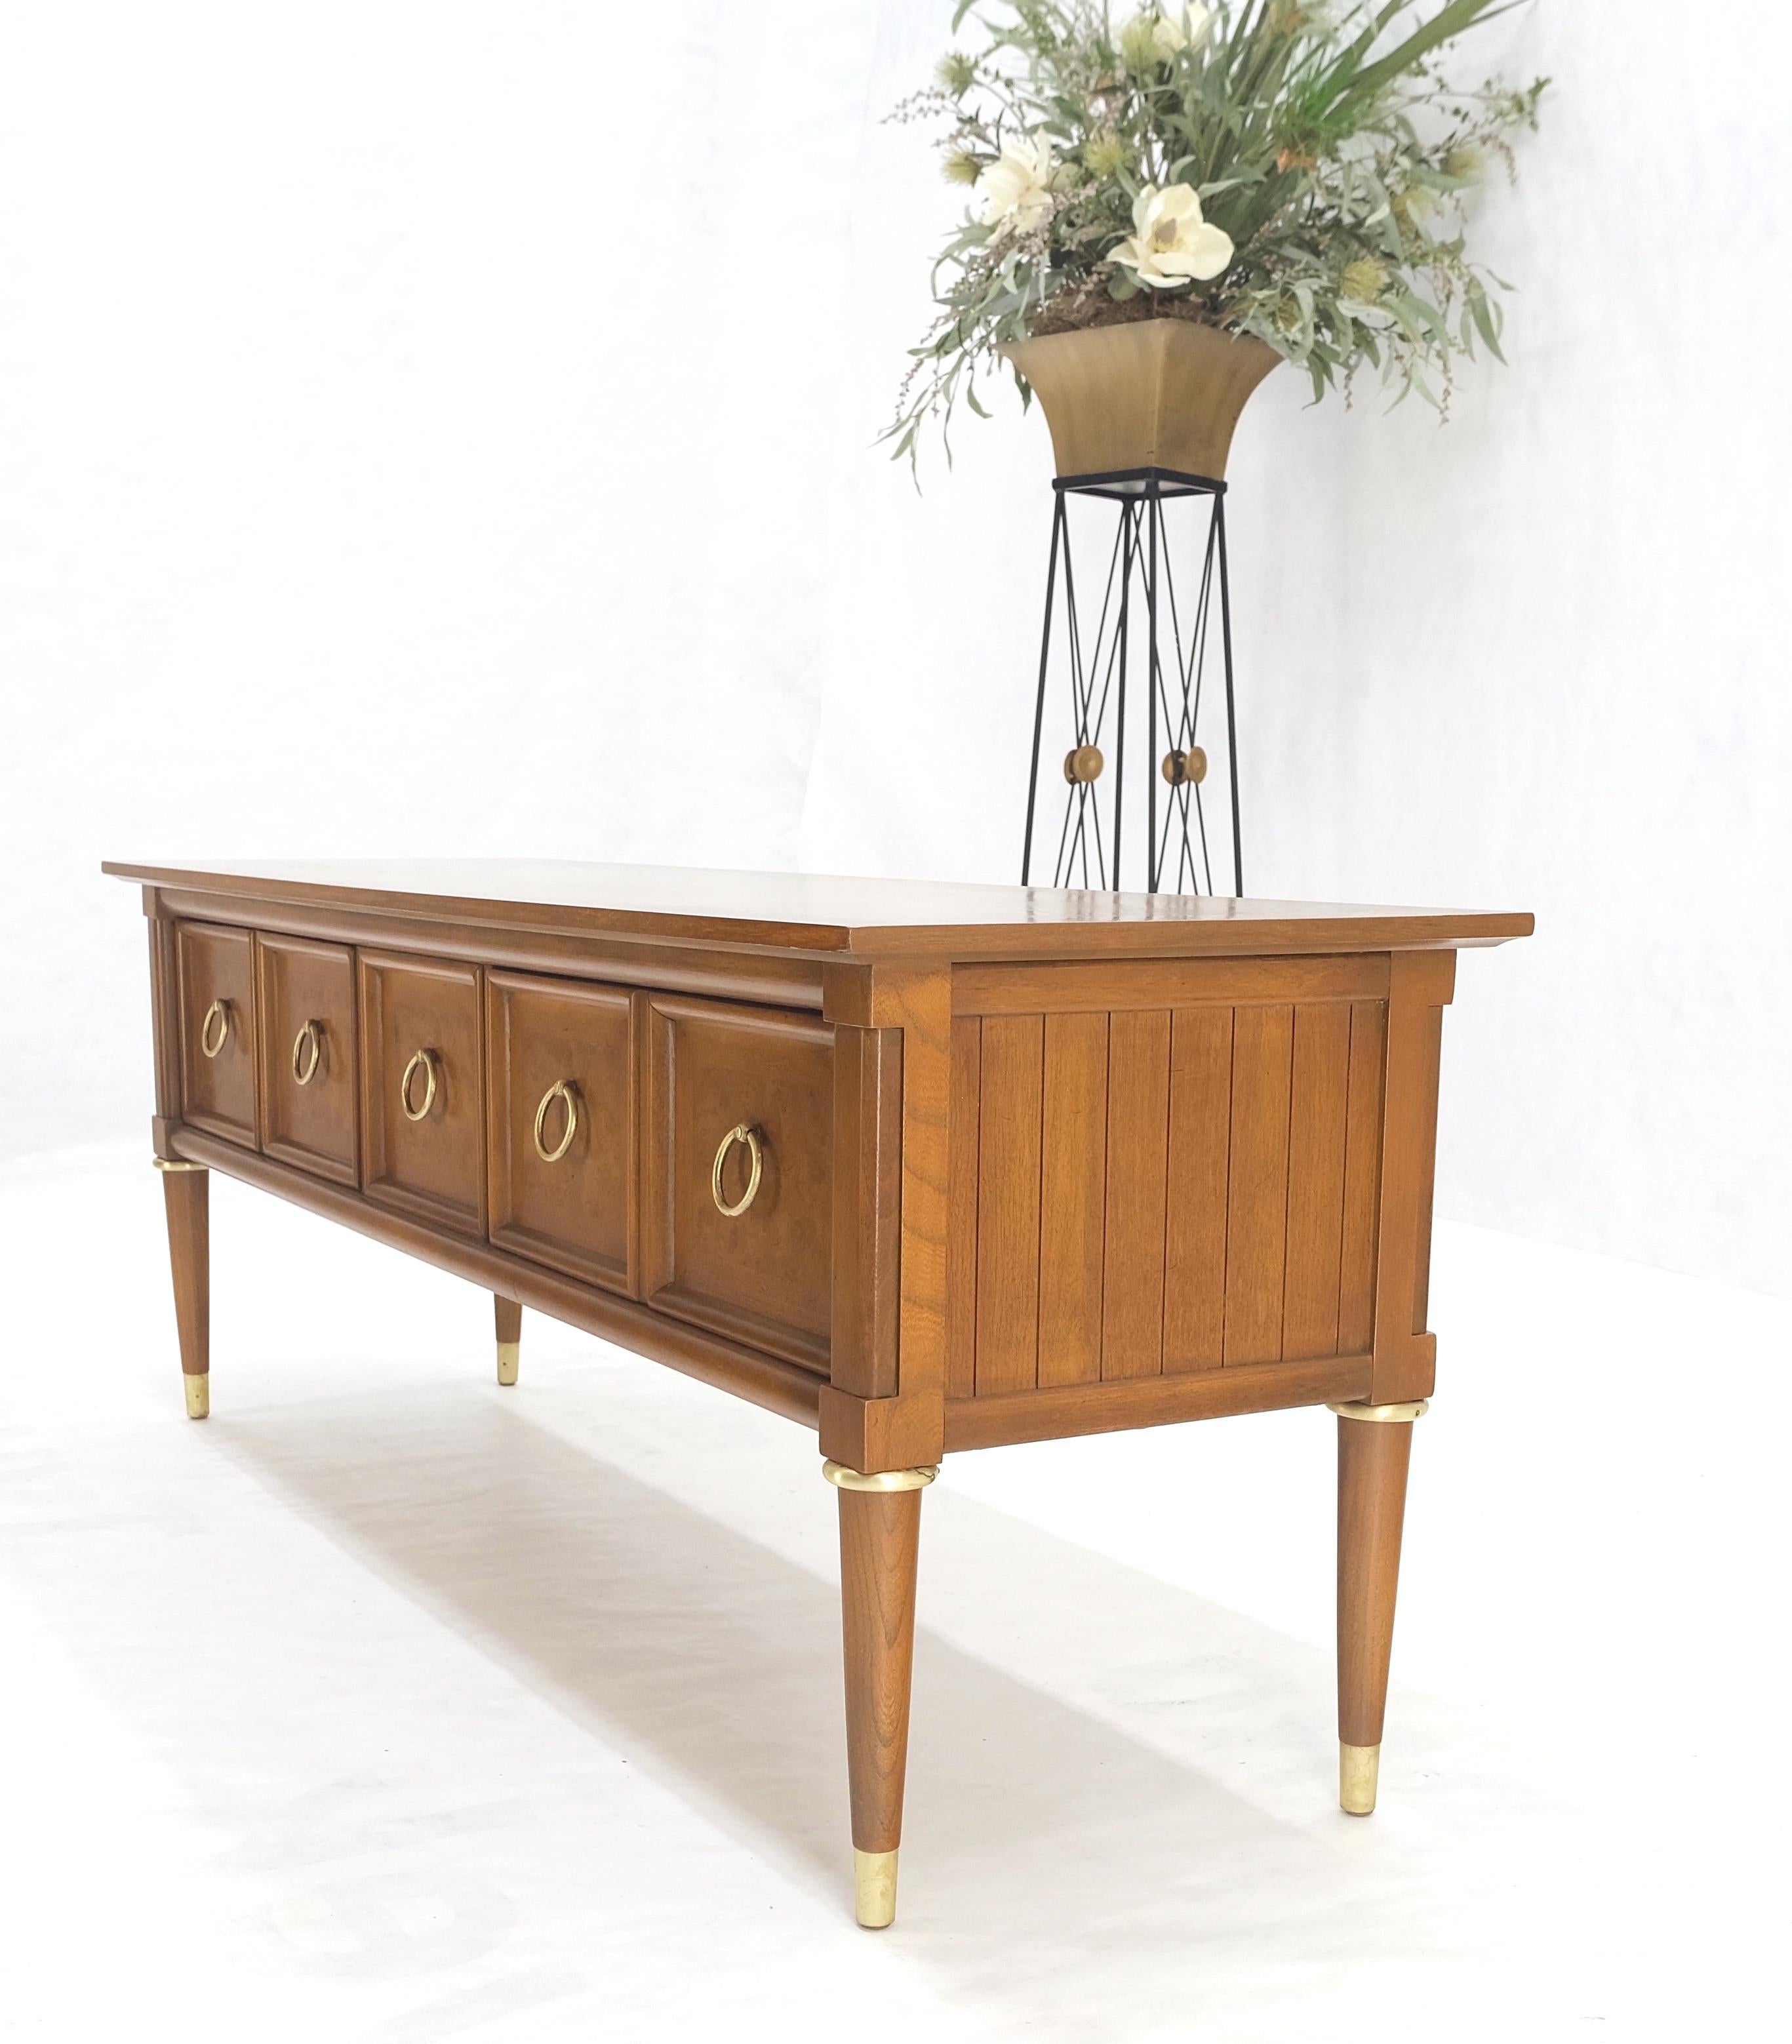 Walnut Brass Drop Rings Pulls Low Profile Tapered Legs Long Credenza Mid Century MINT! For Sale